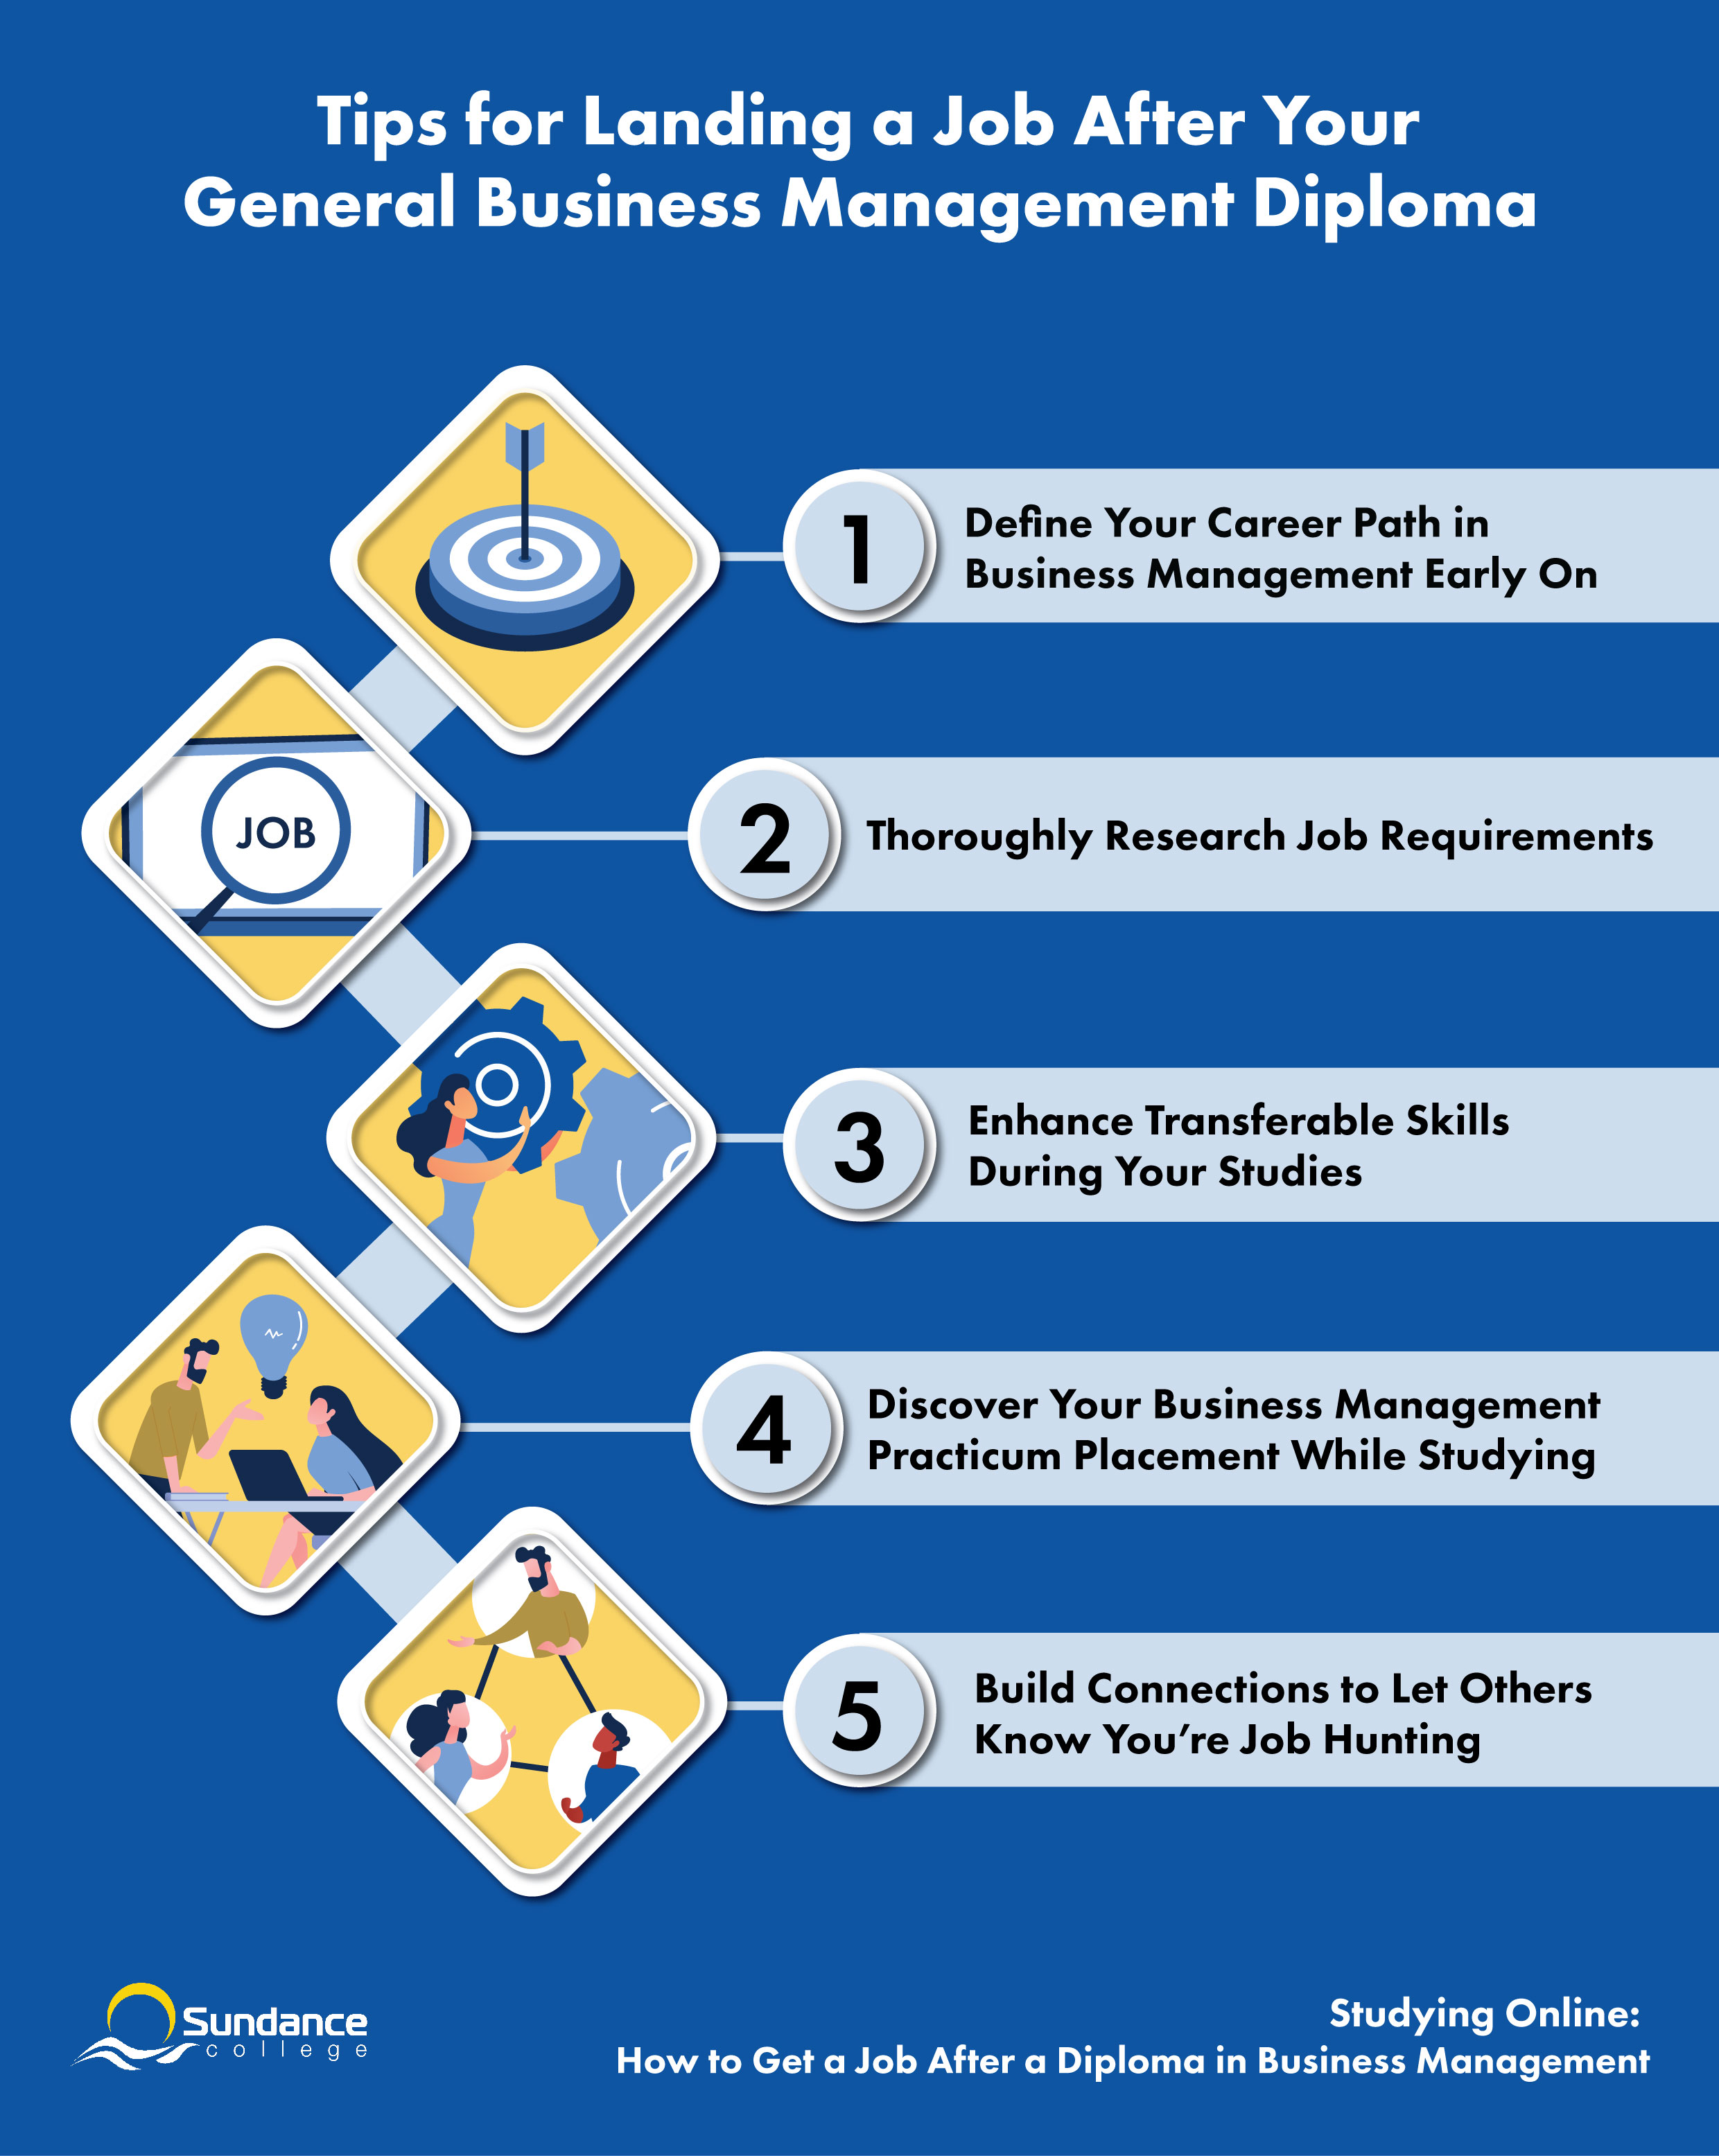 An infographic made by Sundance College about 5 tips for Landing a Job After Your General Business Management Diploma including 1) Define Your Career Path in Business Management Early On 2) Thoroughly Research Job Requirements 3) Enhance Transferrable Skills During Your Studies 4) Discover Your Business Management Practicum Placement While Studying 5) Build Connections to Let Others Know You’re Job Hunting.